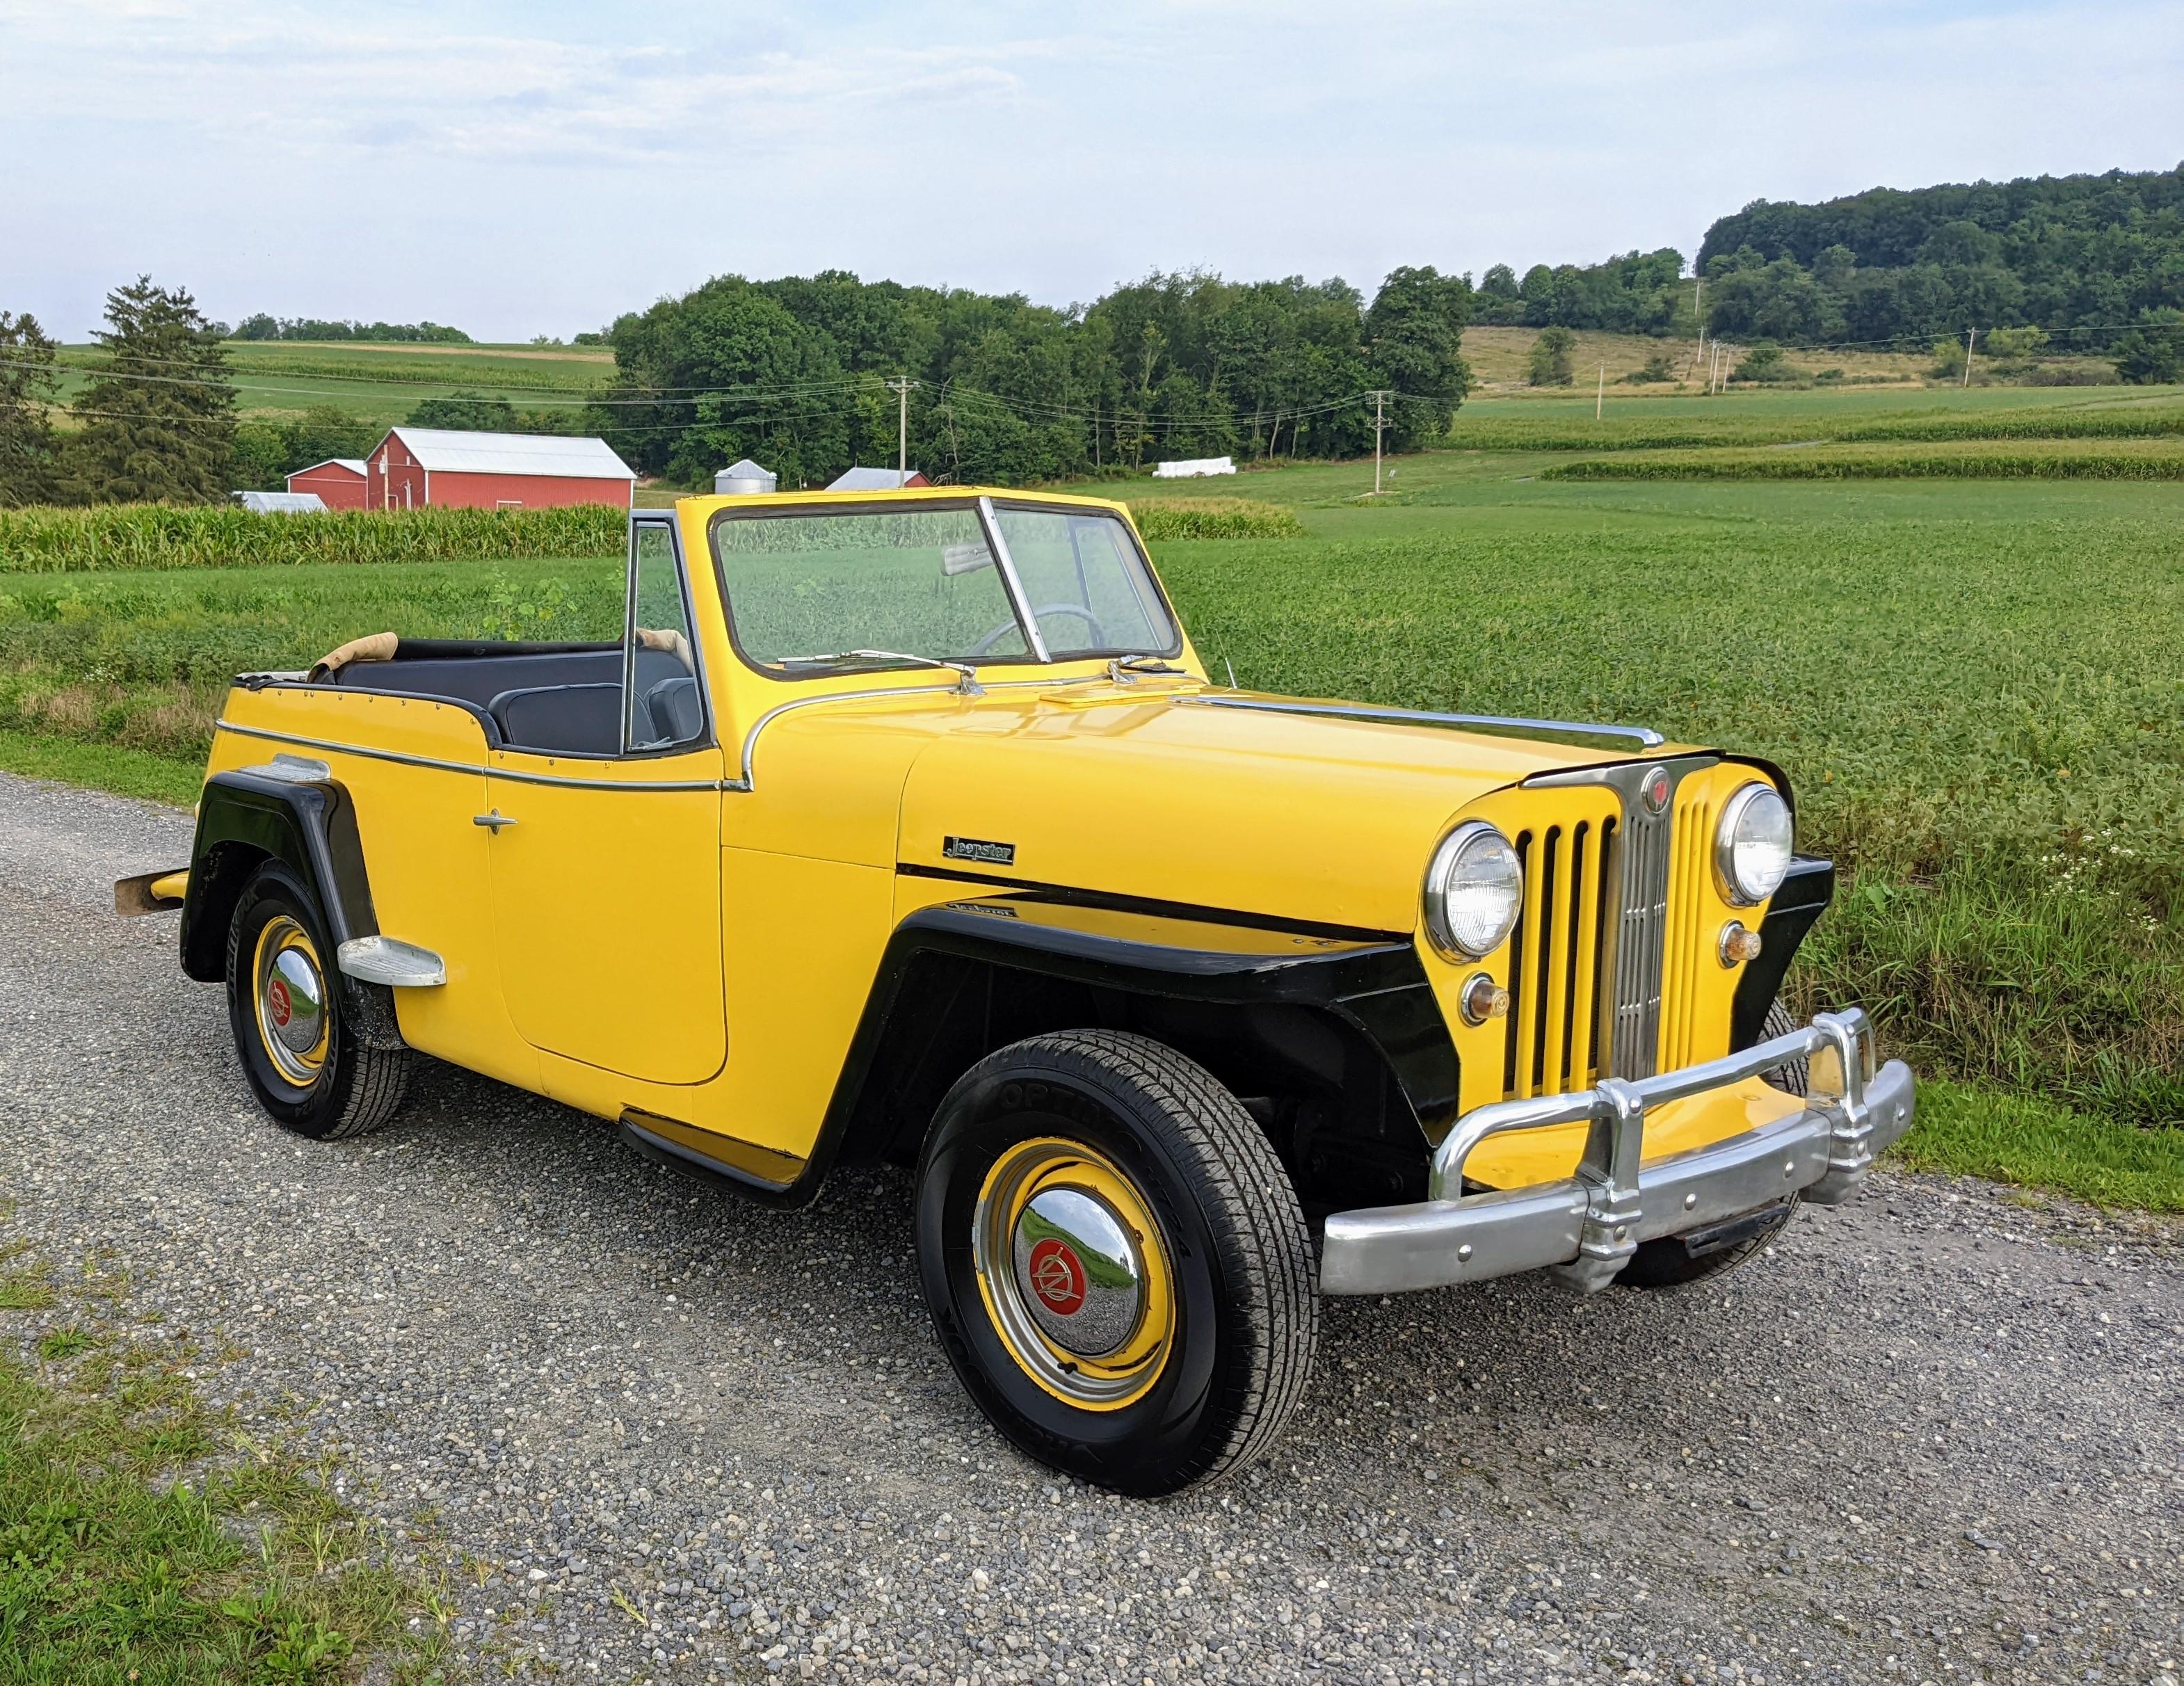 1949 Willys Jeepster Sdn. Reconstructed title. 6 cyl, 3 on the tree. 4x2, v